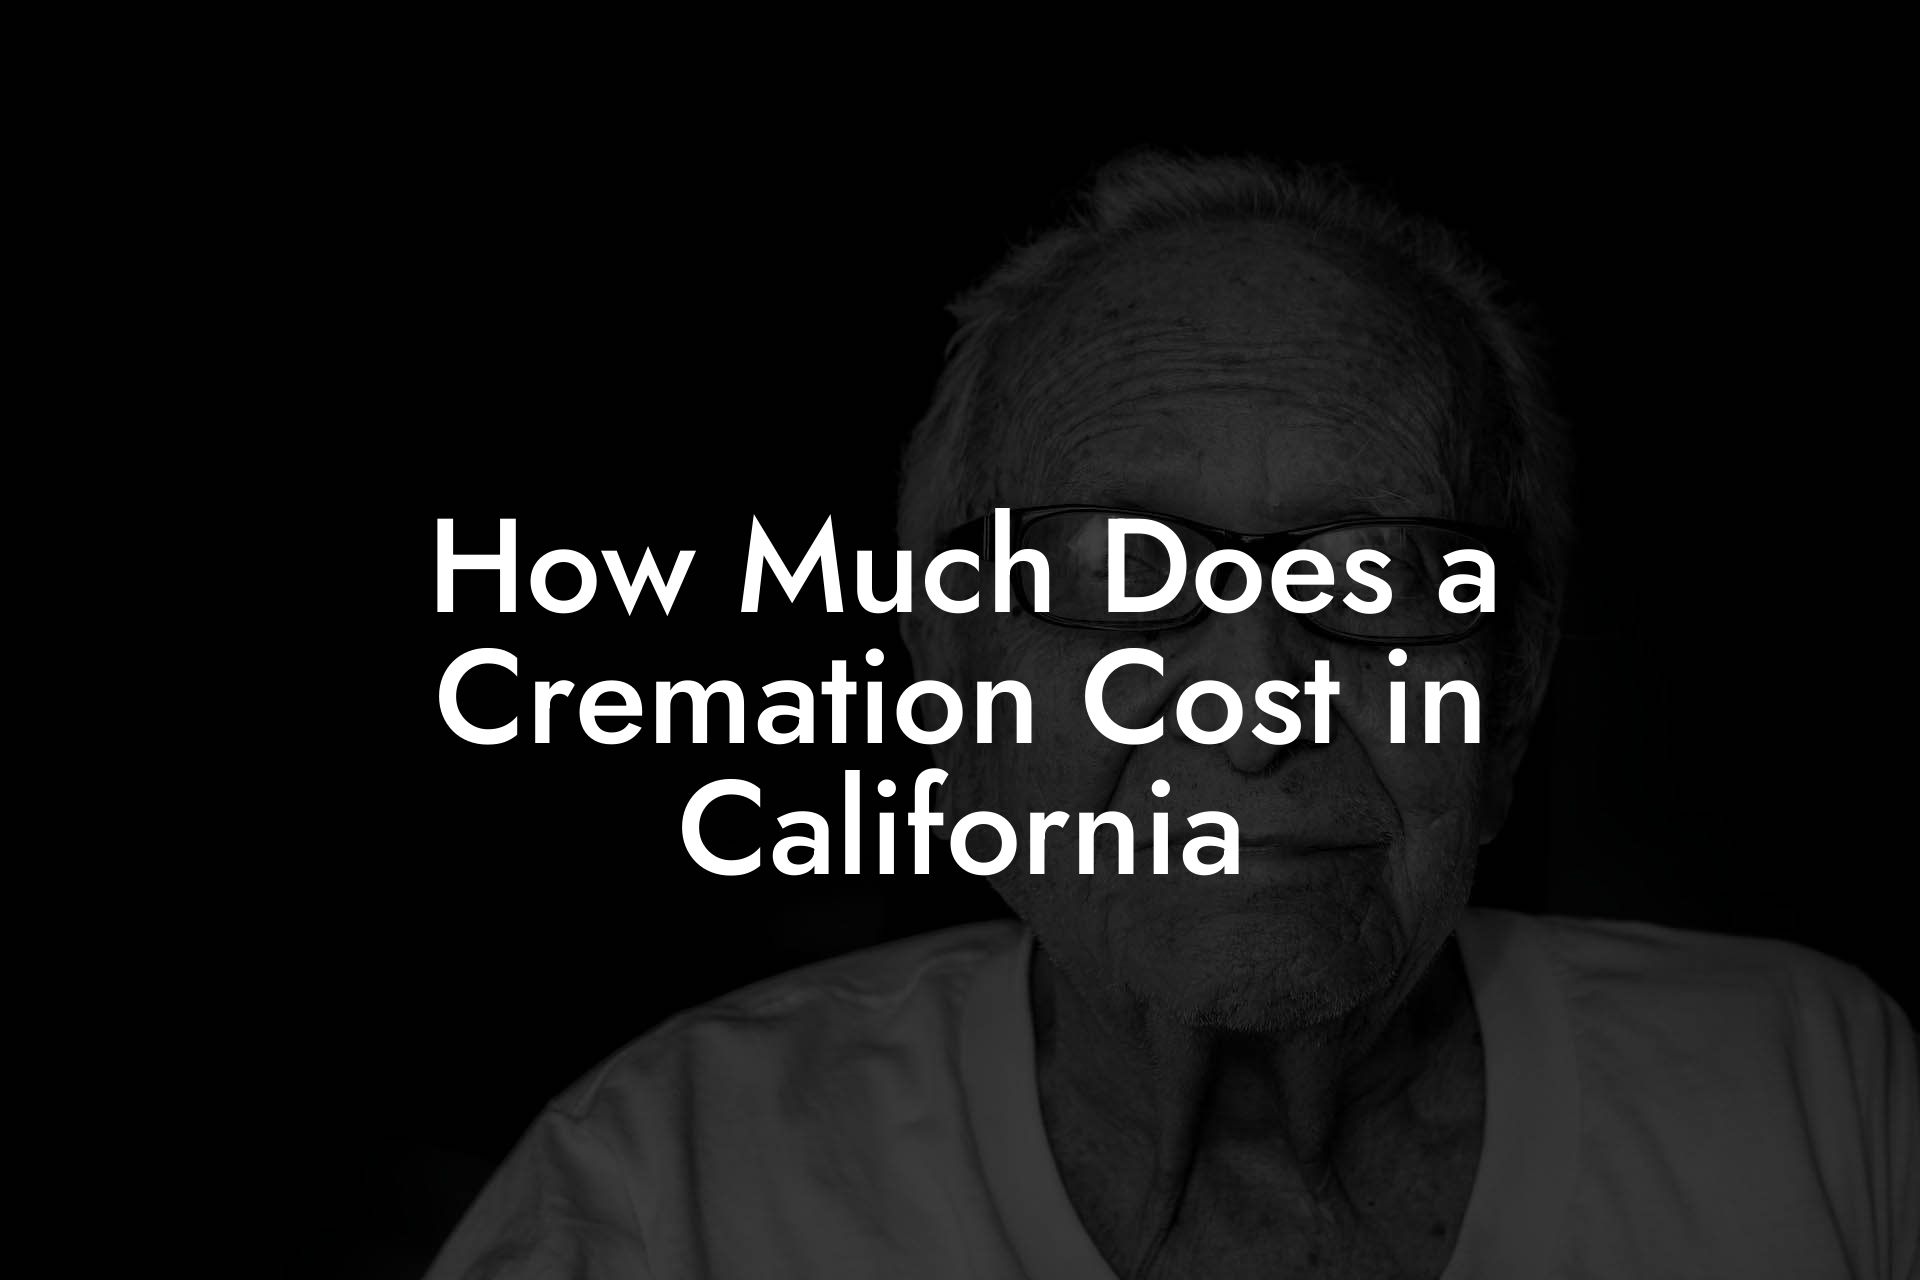 How Much Does a Cremation Cost in California